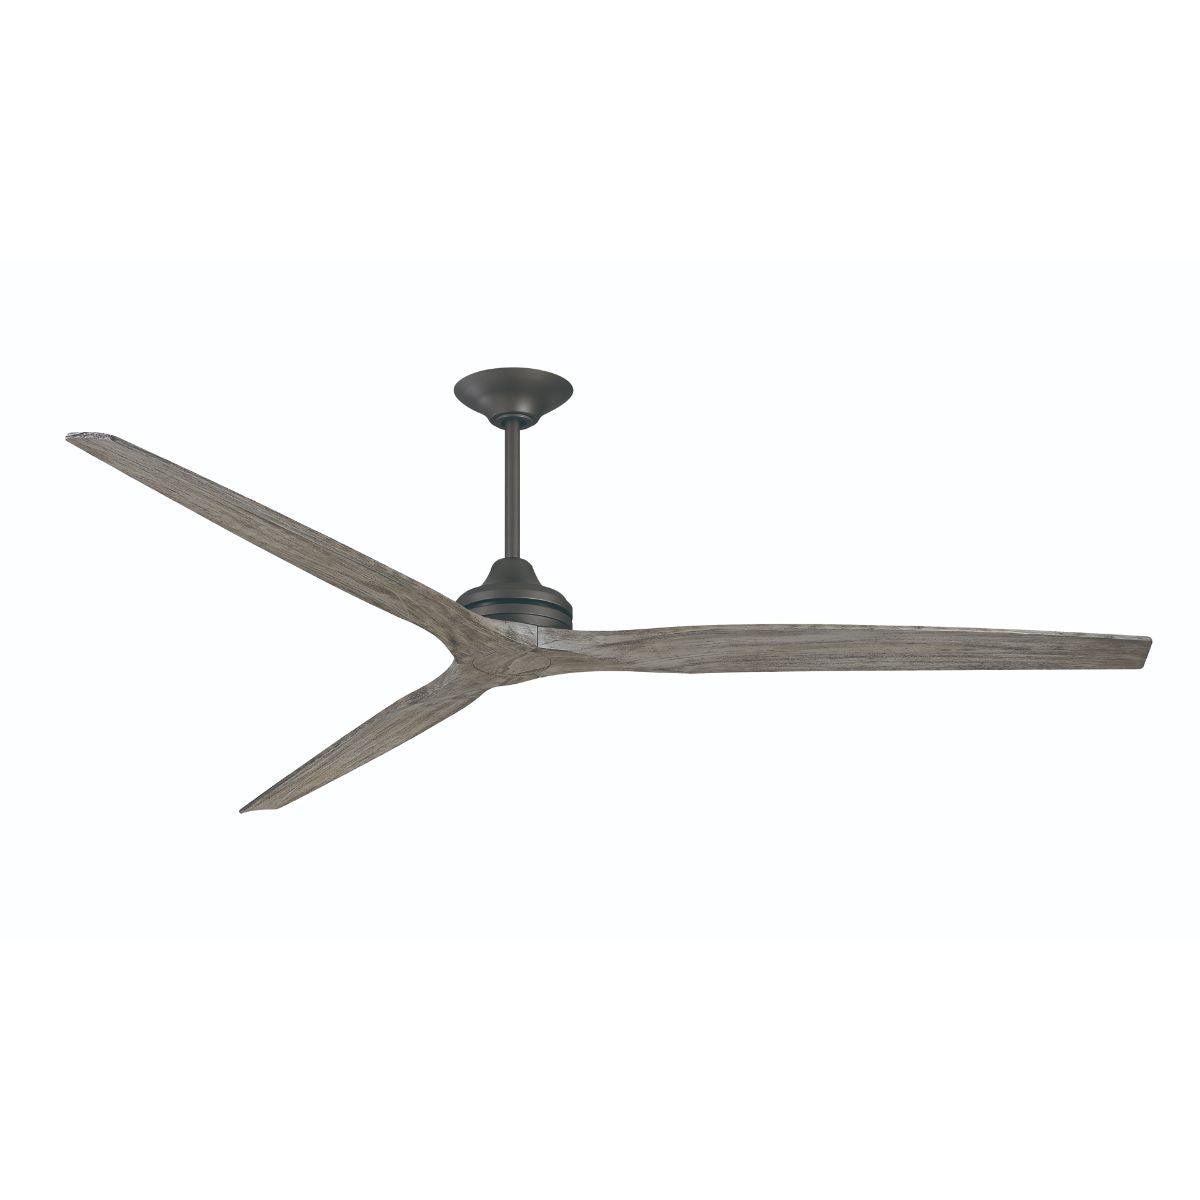 Spitfire DC Outdoor Ceiling Fan Motor With Remote, Set of 3 Blades Sold Separately